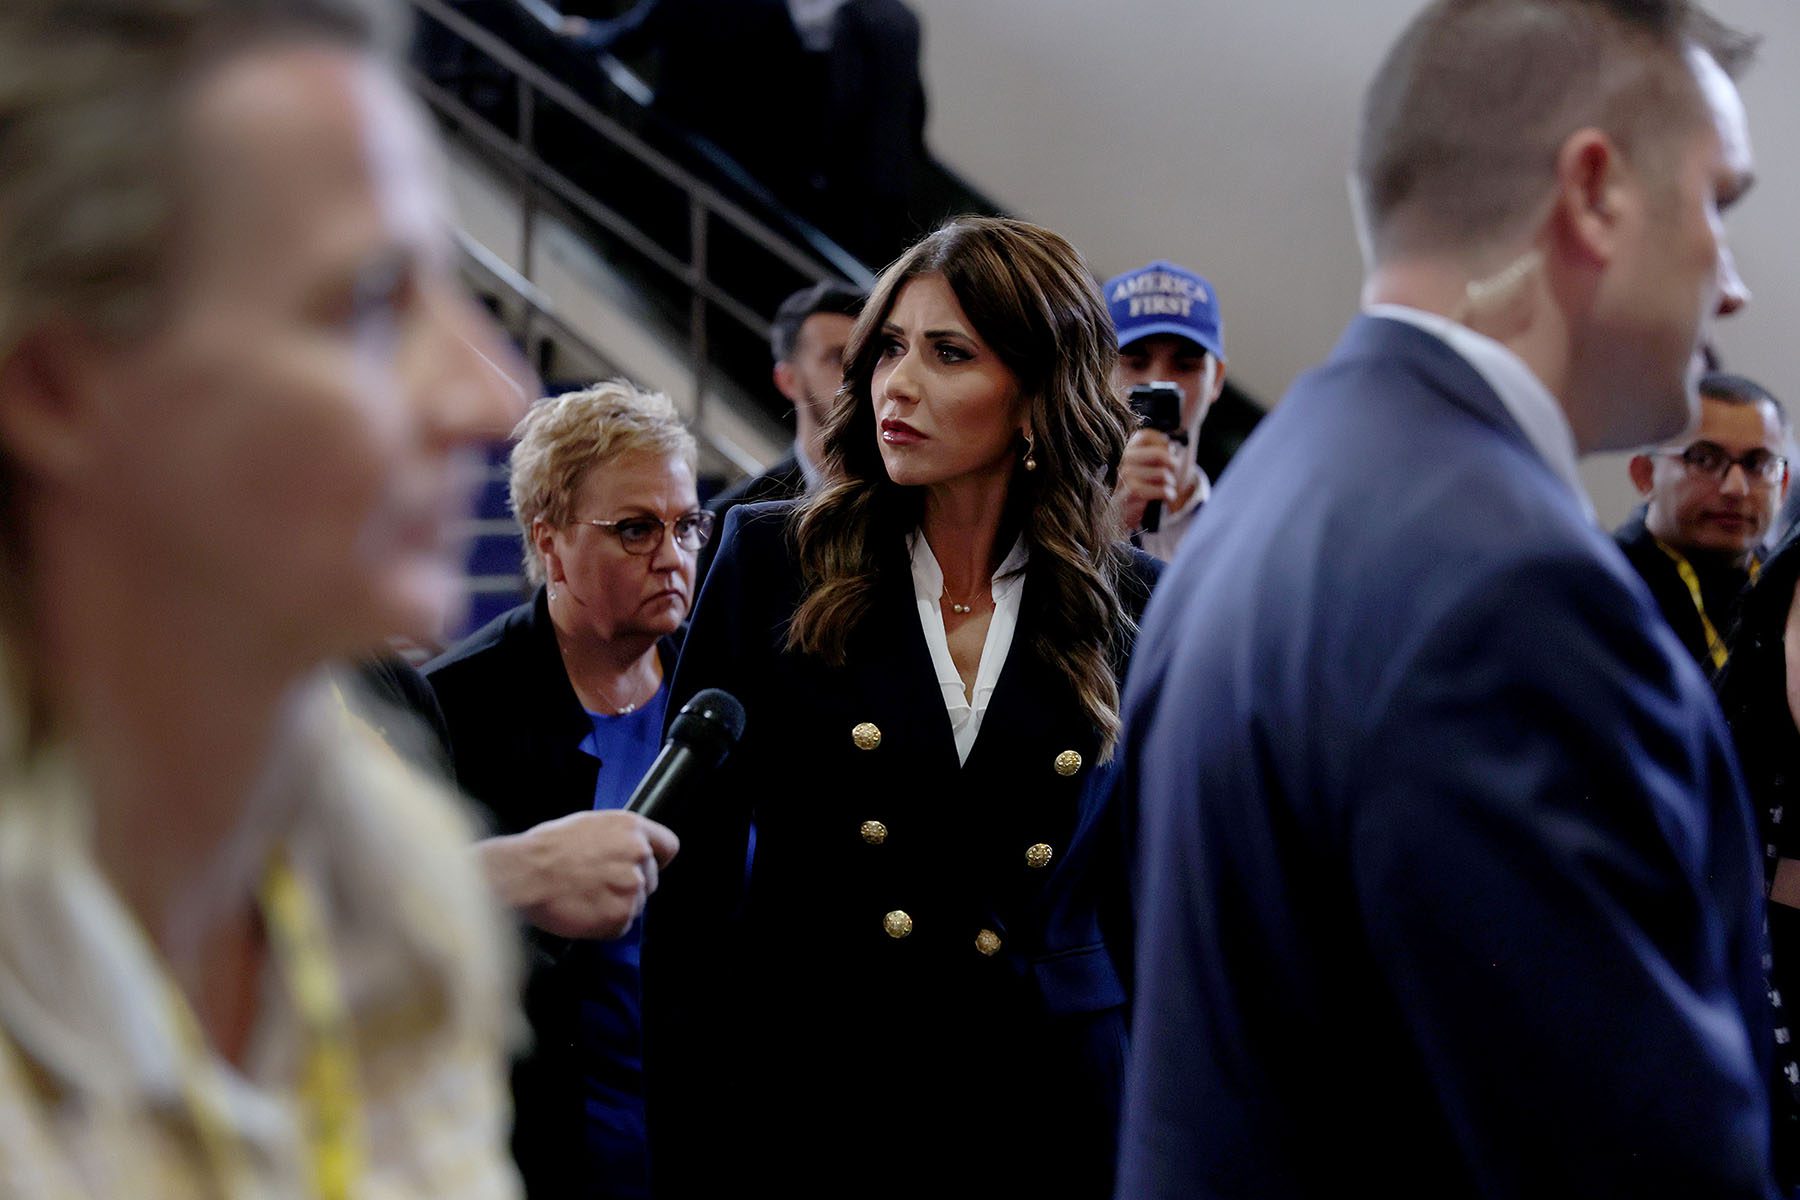 Kristi Noem attends the Conservative Political Action Conference. She is seen walking as reporters try to ask her questions.